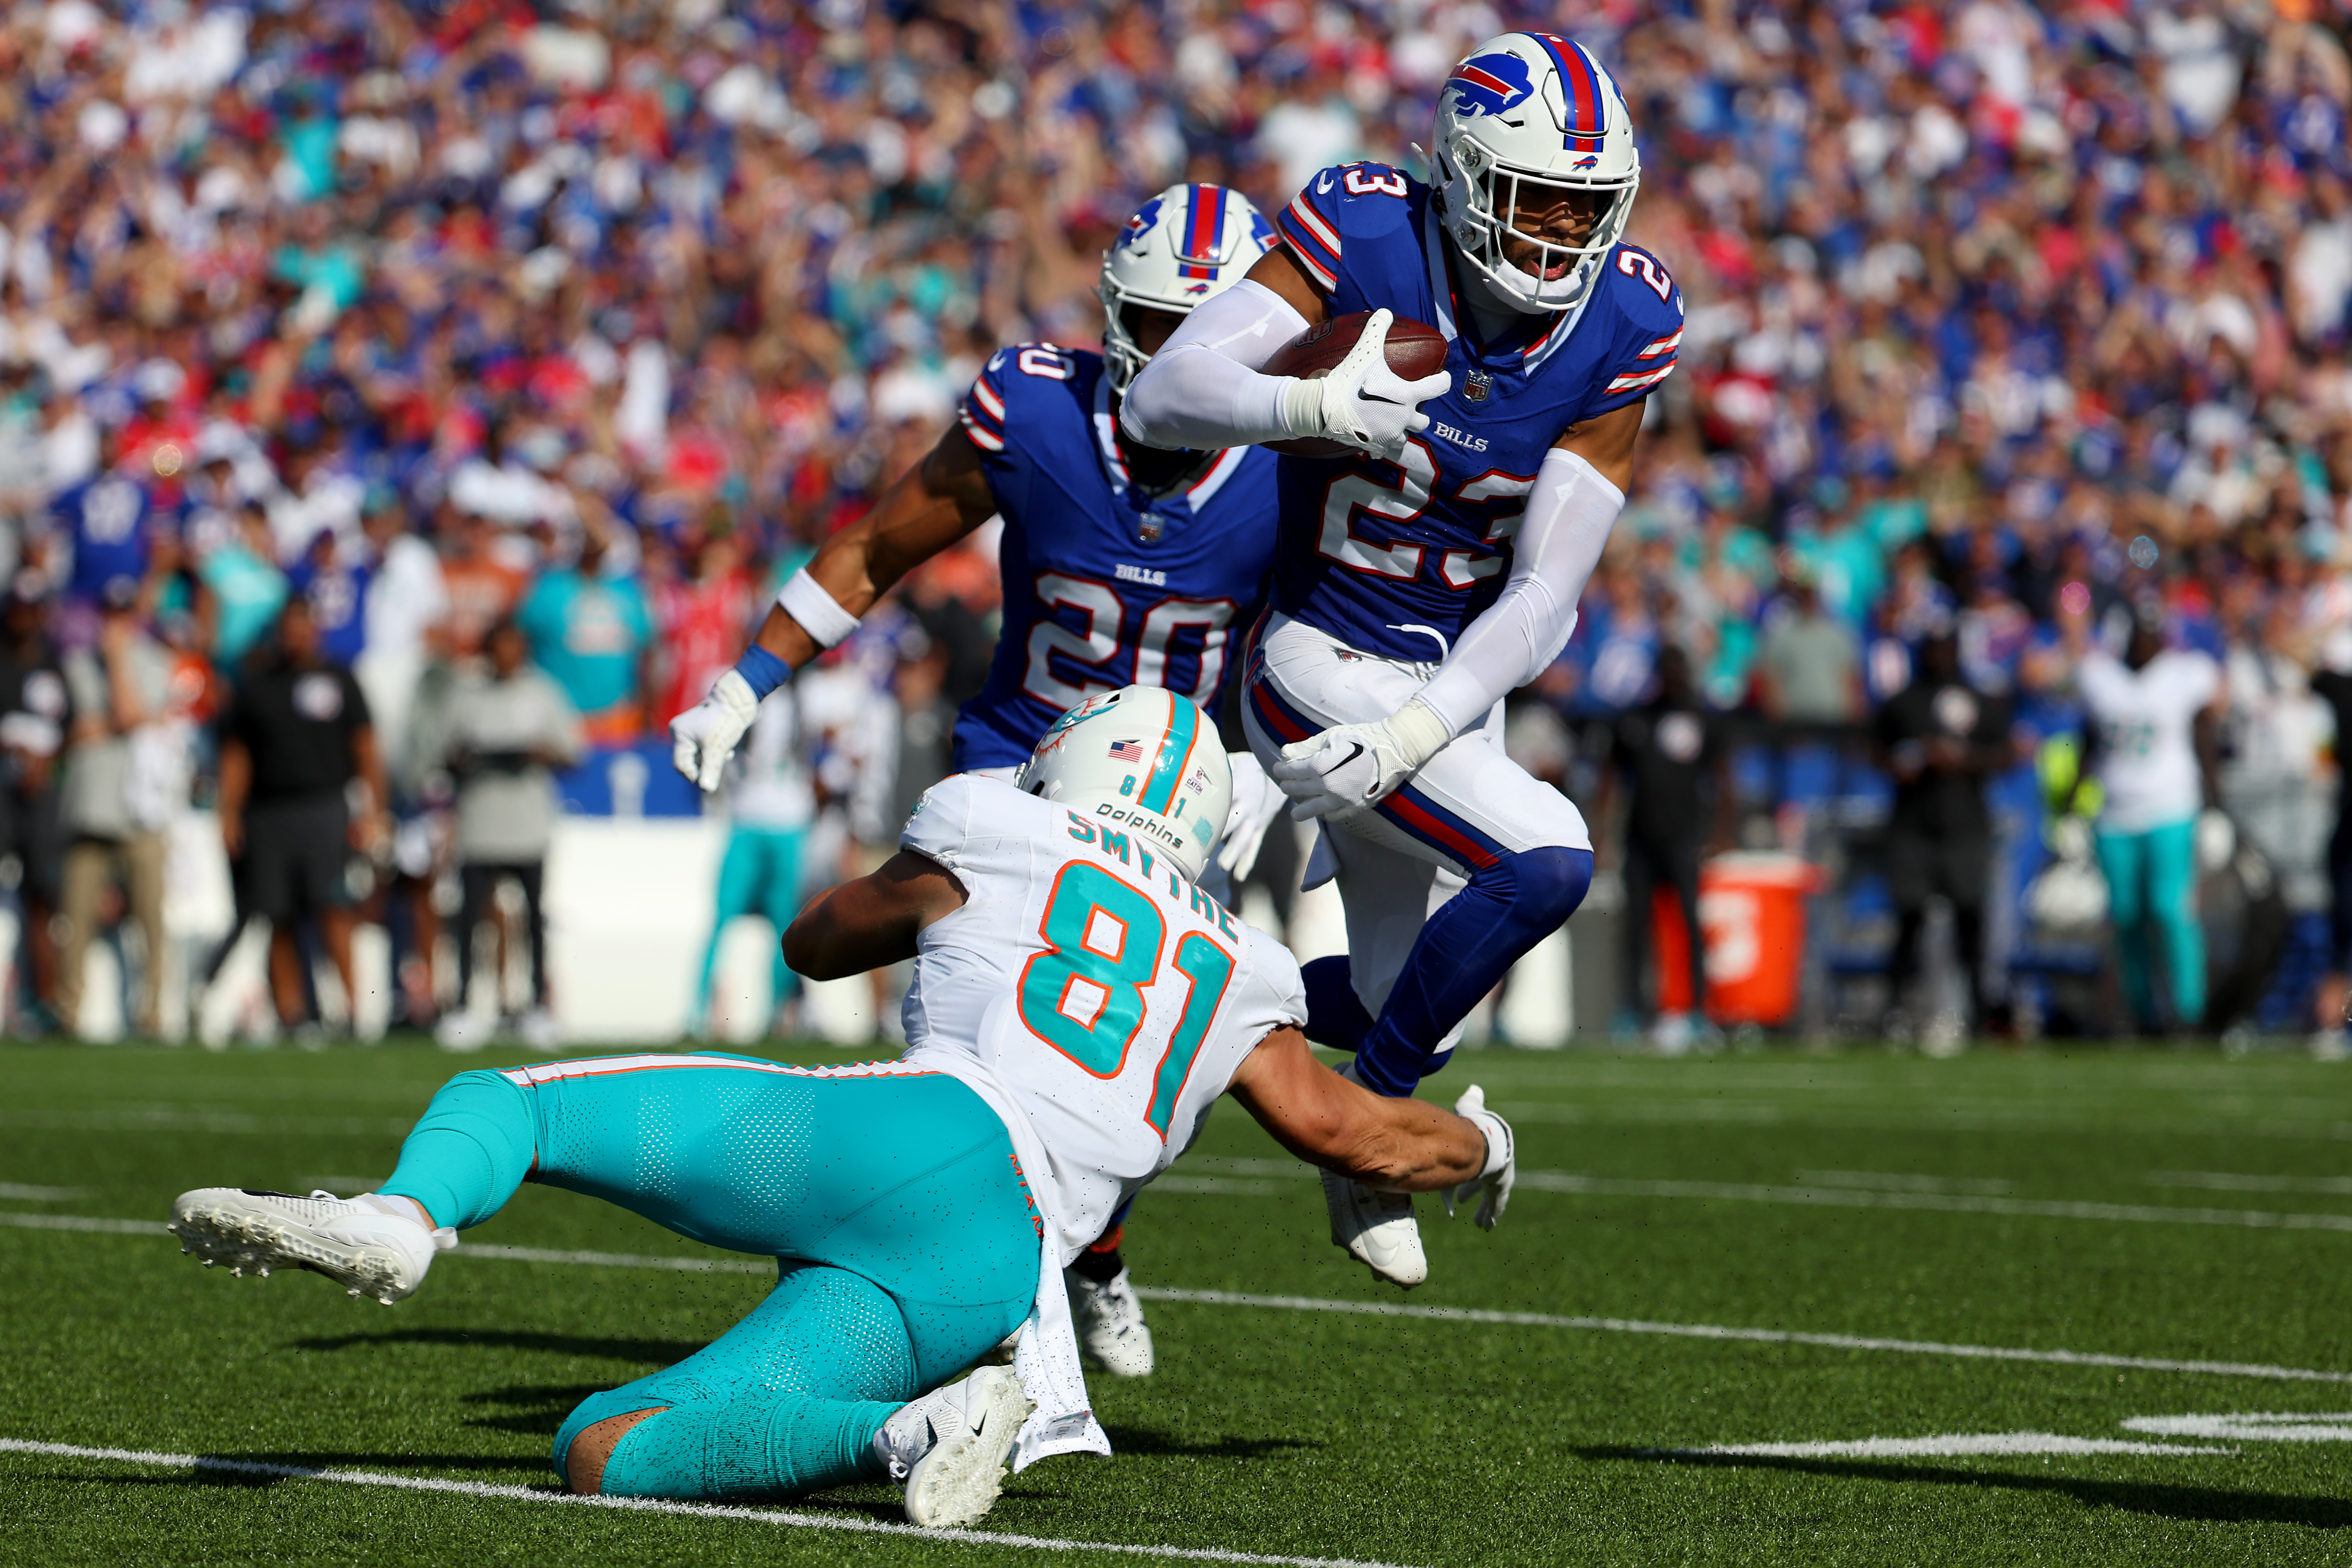 Miami Dolphins blown out by Buffalo Bills, 48-20, at Highmark